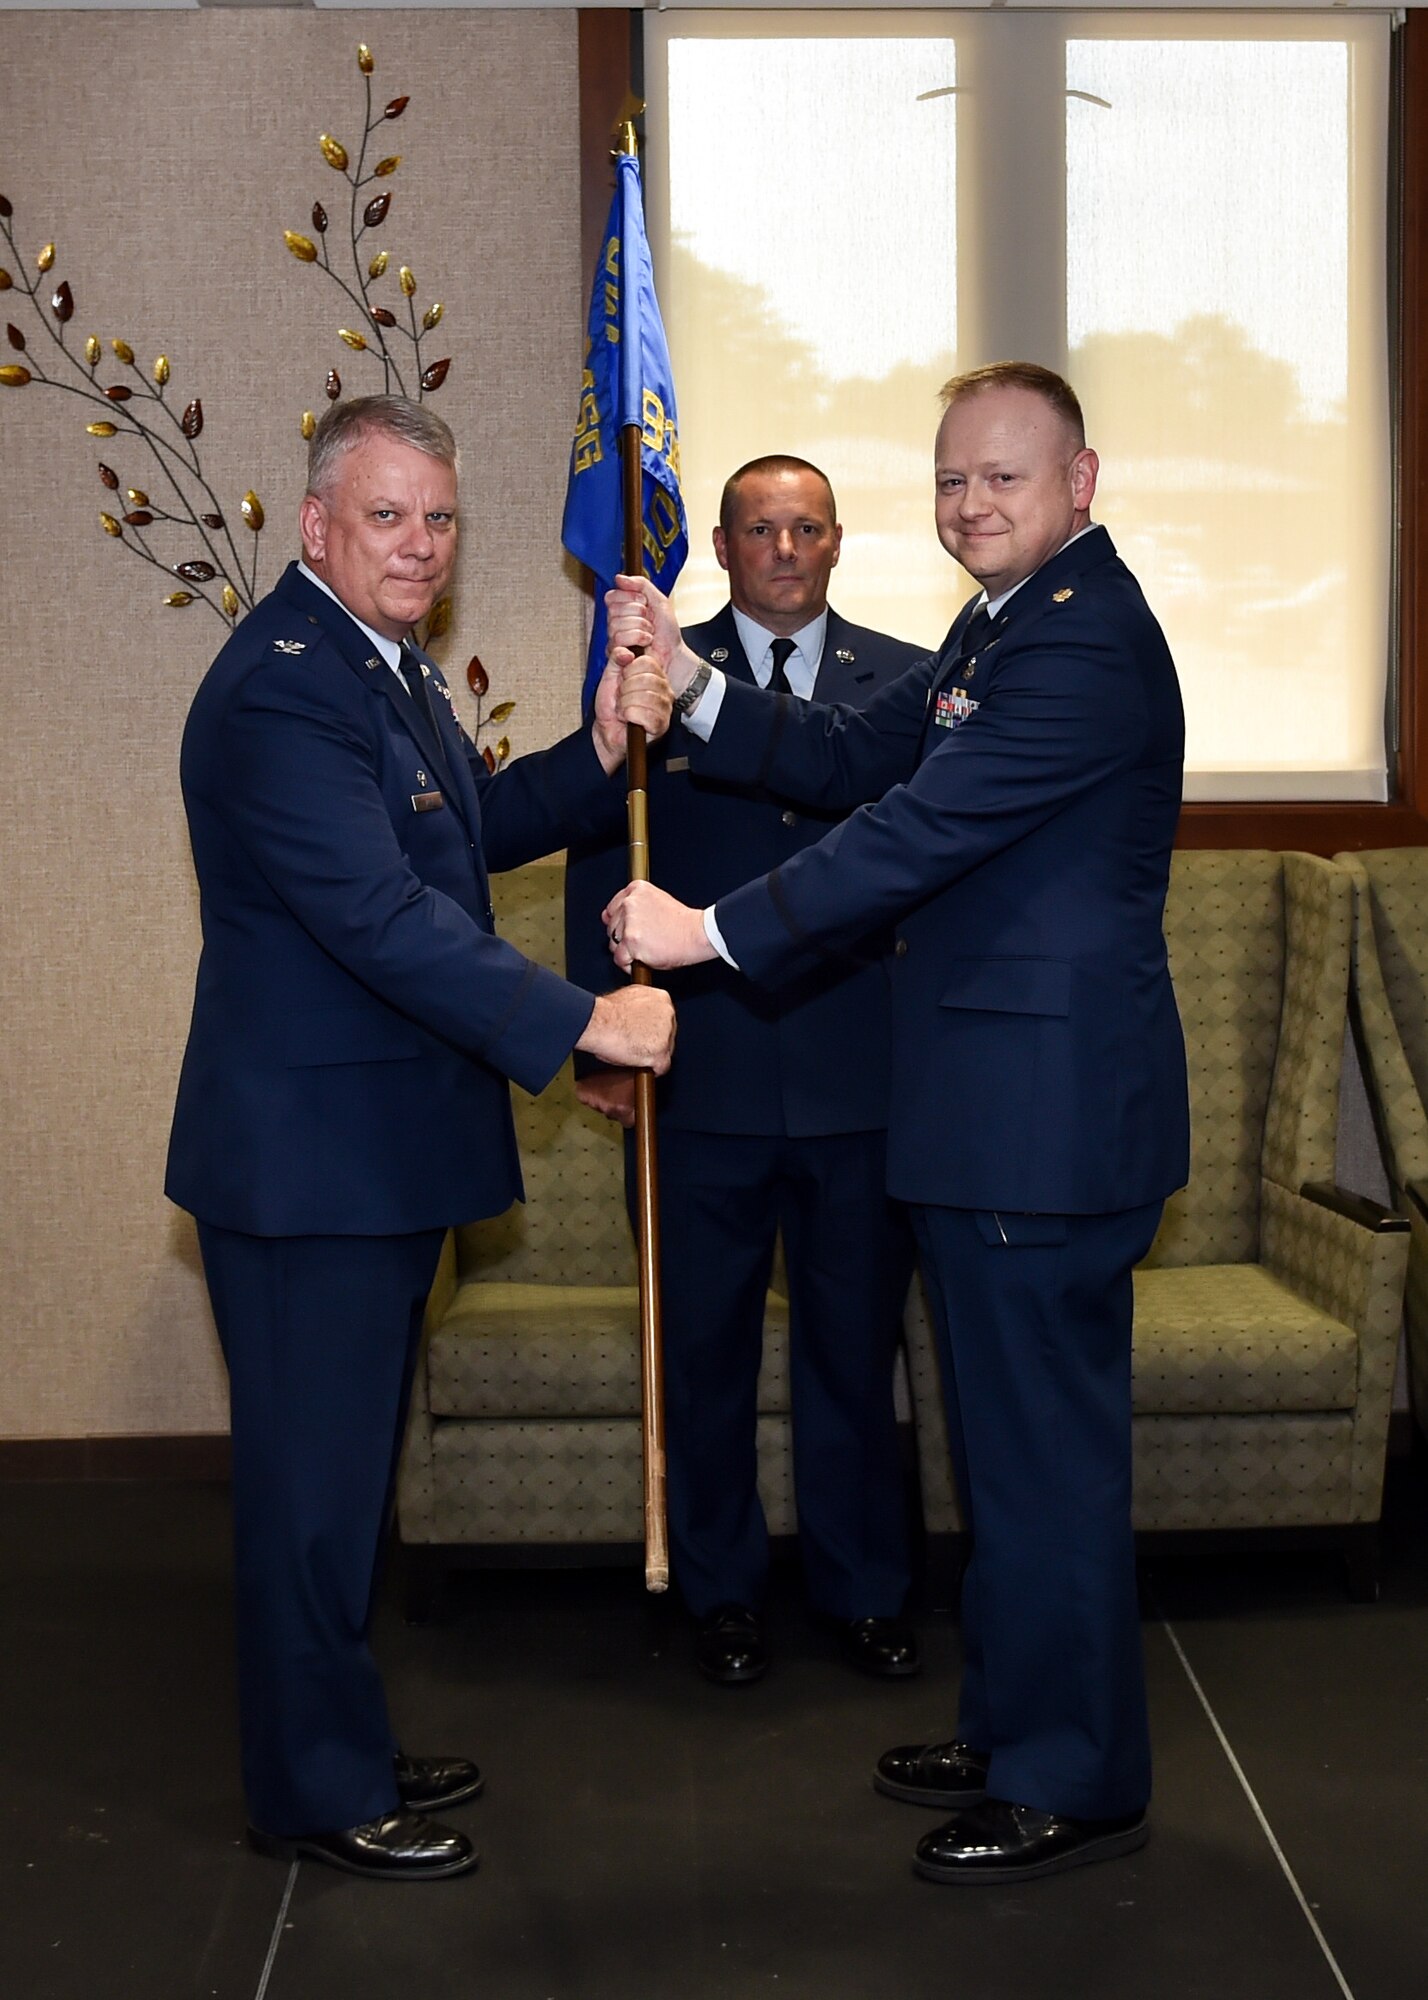 Maj. Russell R. Whitlock took command of the 910th Communications Squadron (CS) from Lt. Col. Kelly J. Quidley June 3, 2018, here.